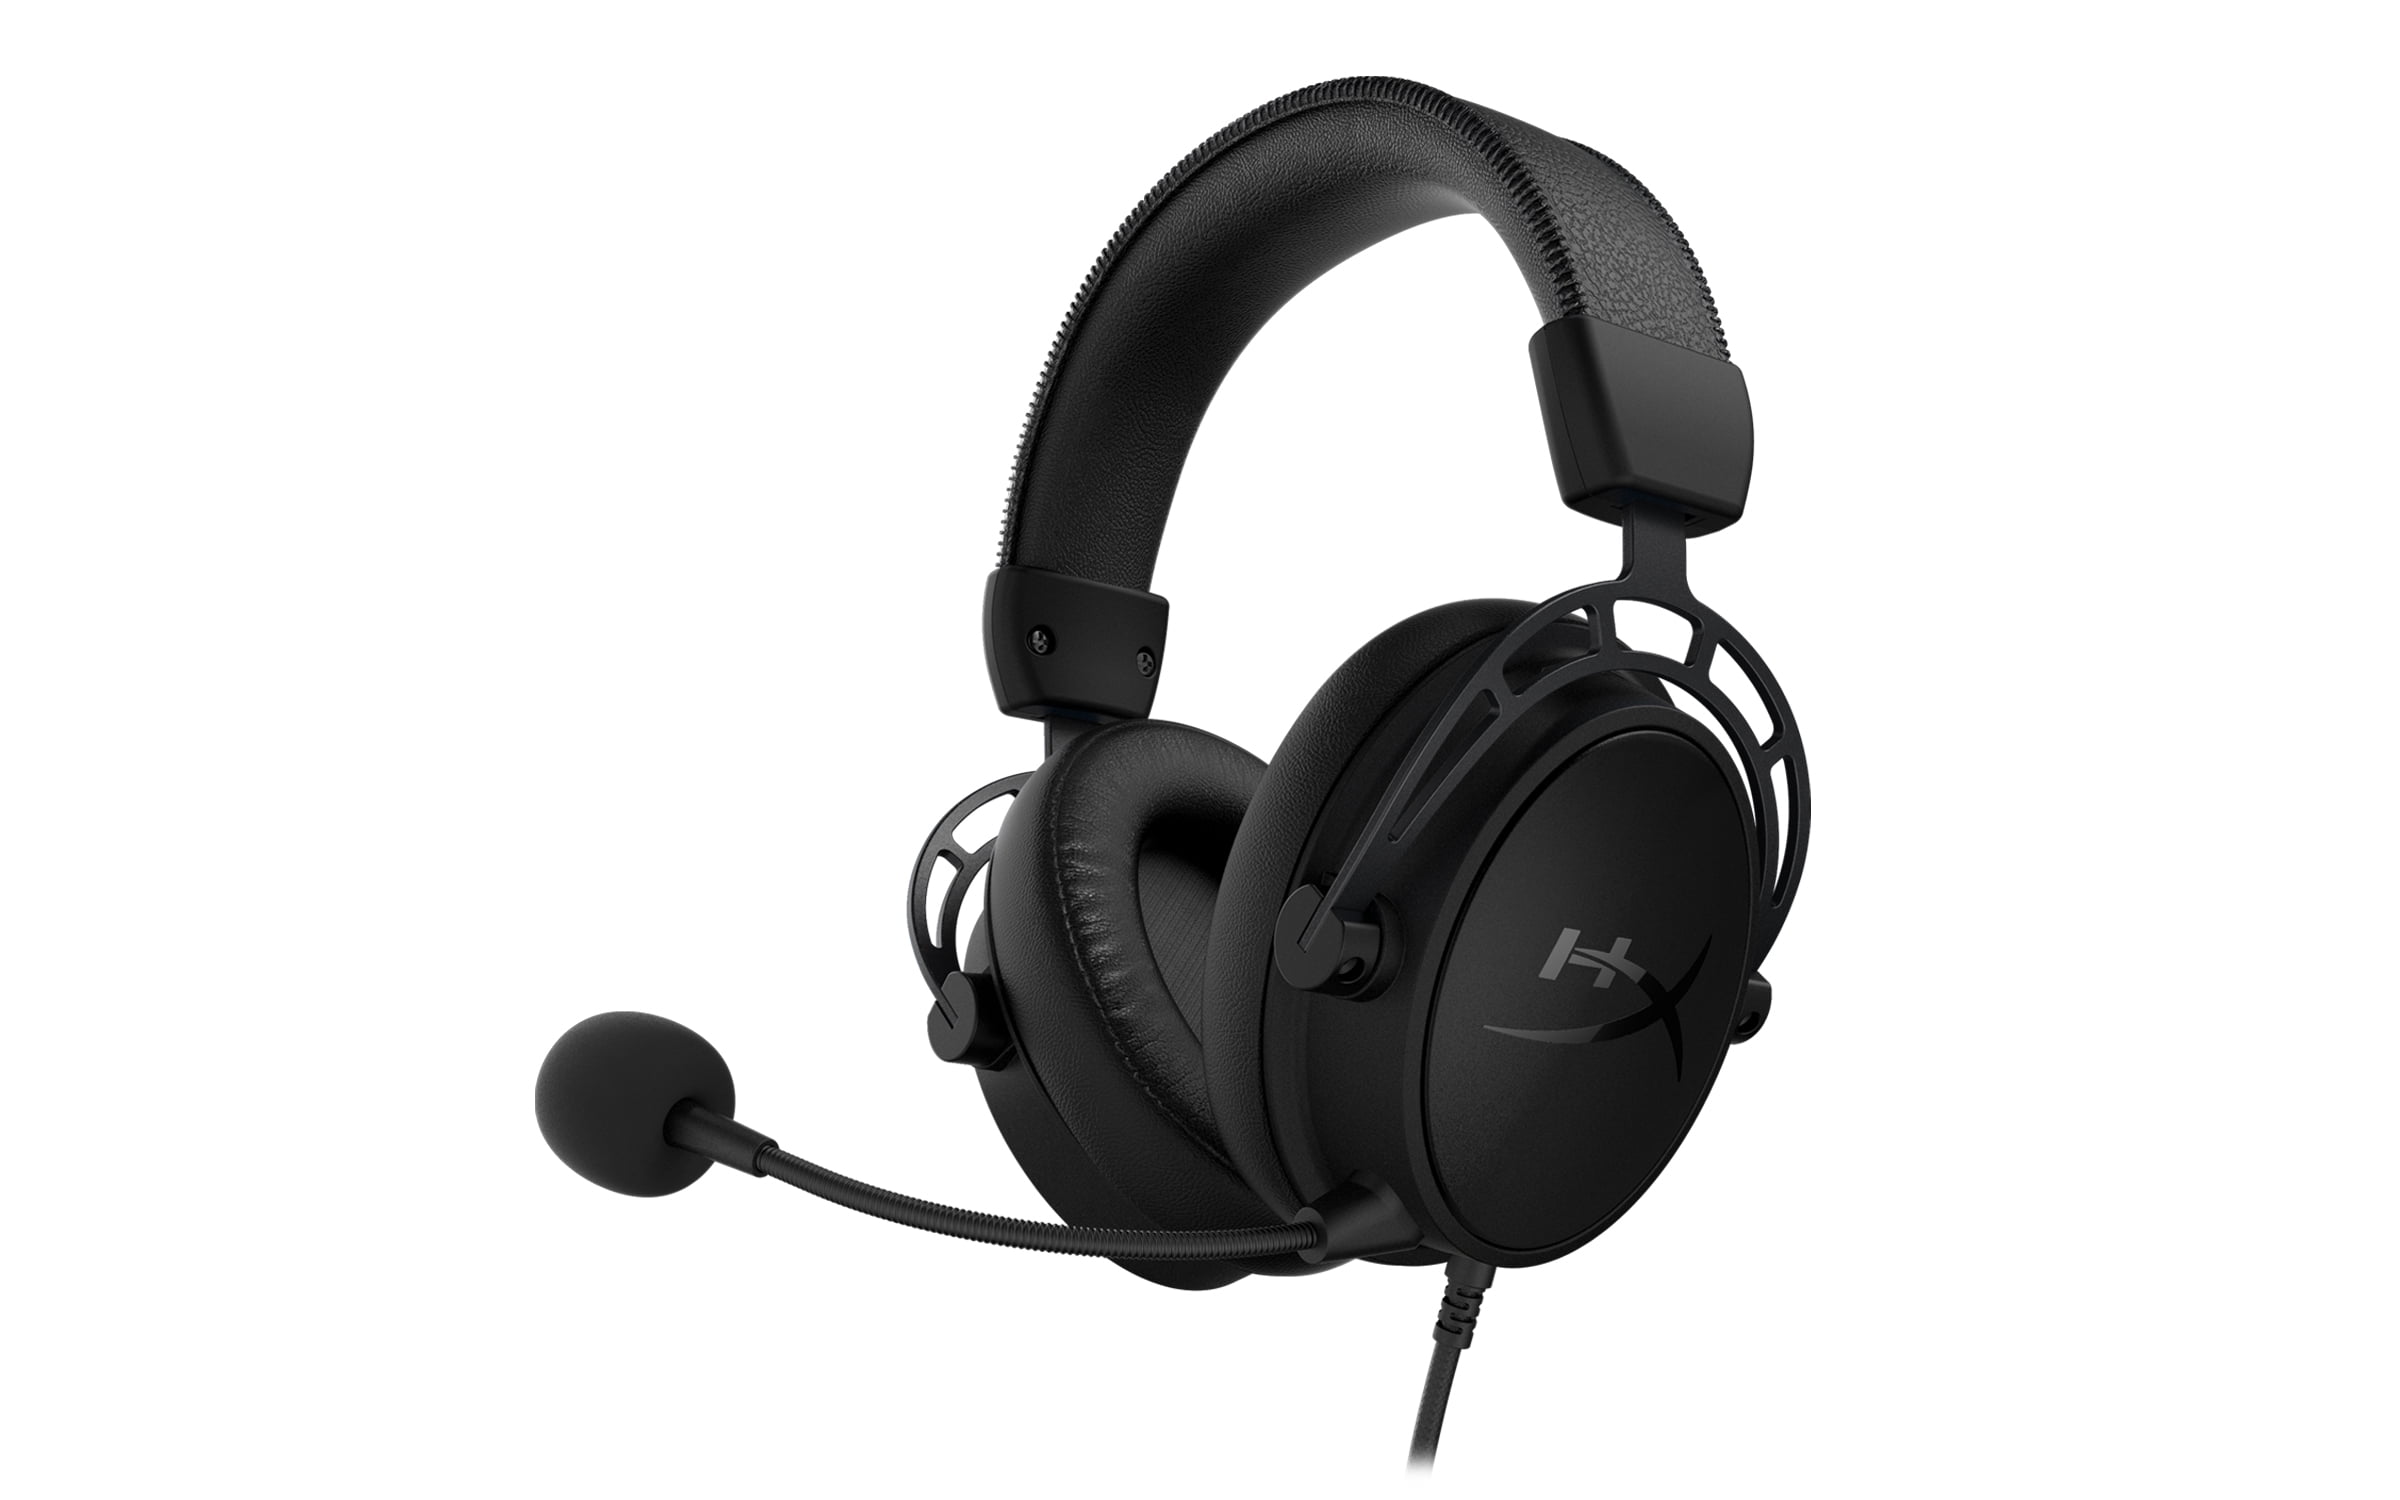 Breathable Leatherette for PC Gaming Headset and Noise Cancelling Microphone 7.1 Surround Sound HyperX Cloud Alpha S Dual Chamber Drivers Chat Mixer Adjustable Bass Memory Foam 